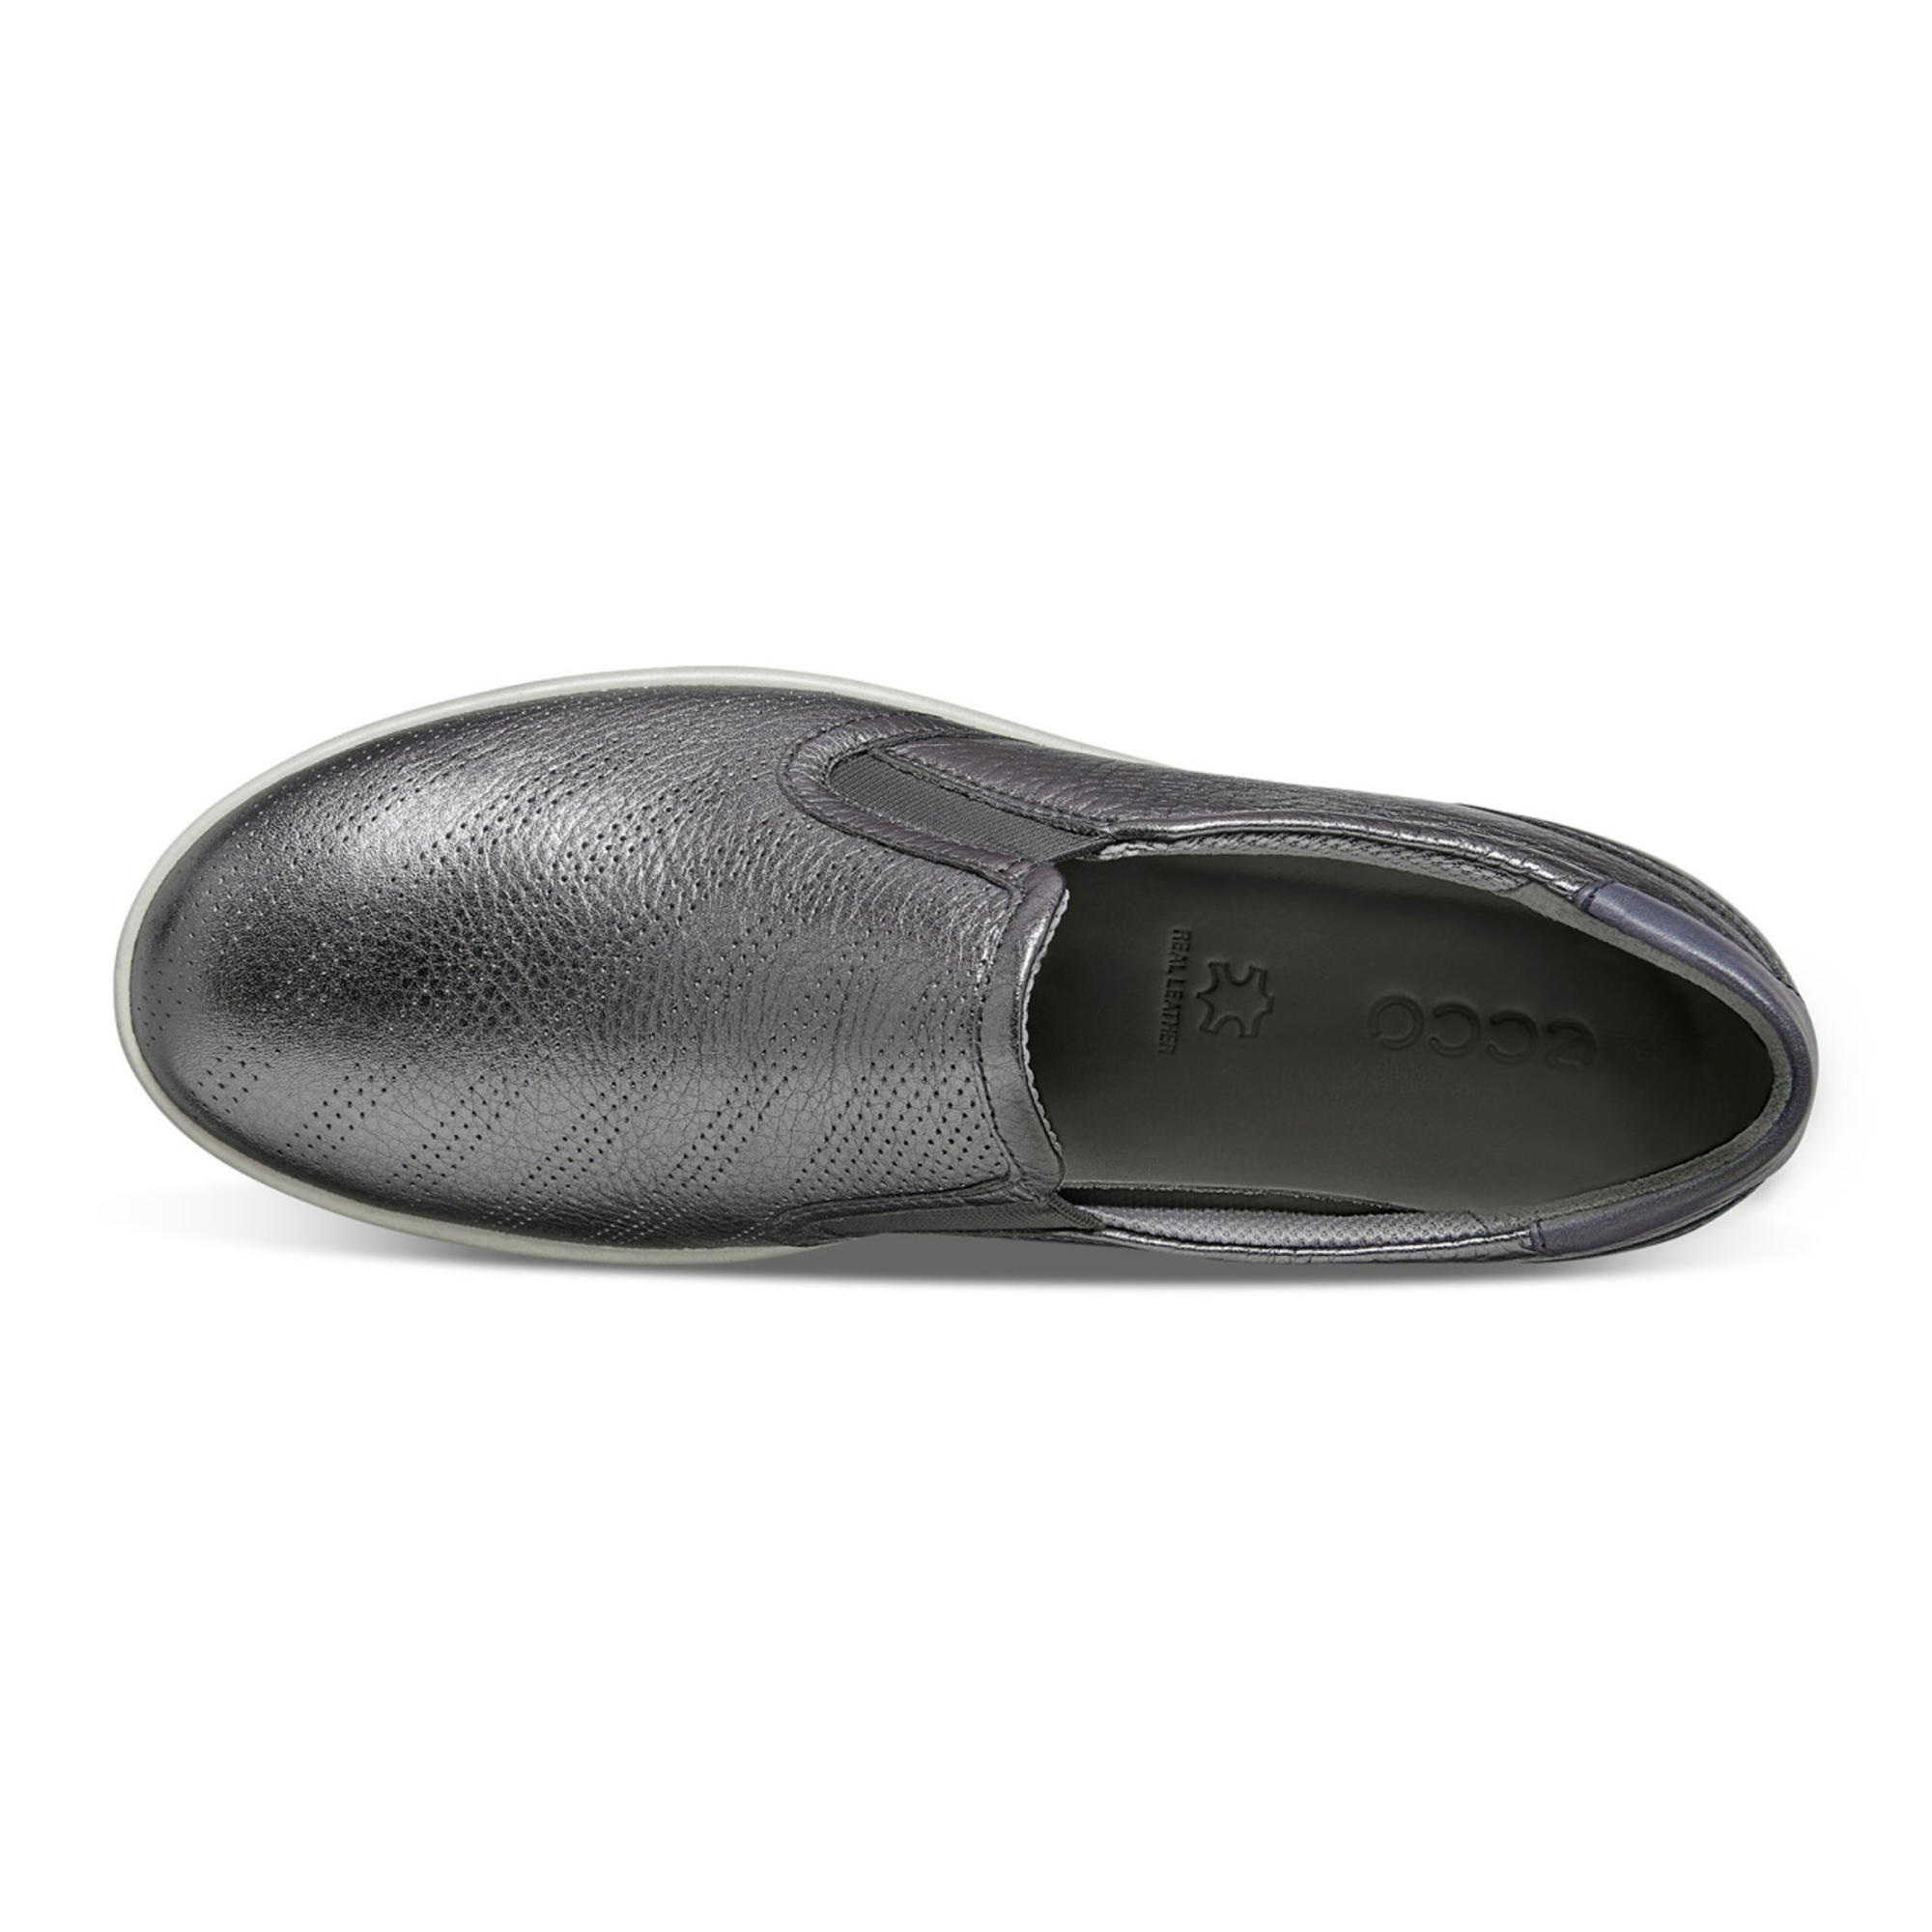 Ecco Aimee Sport Slip On 41 - Products - Veryk Mall Veryk Mall, many product, quick response, safe your money!